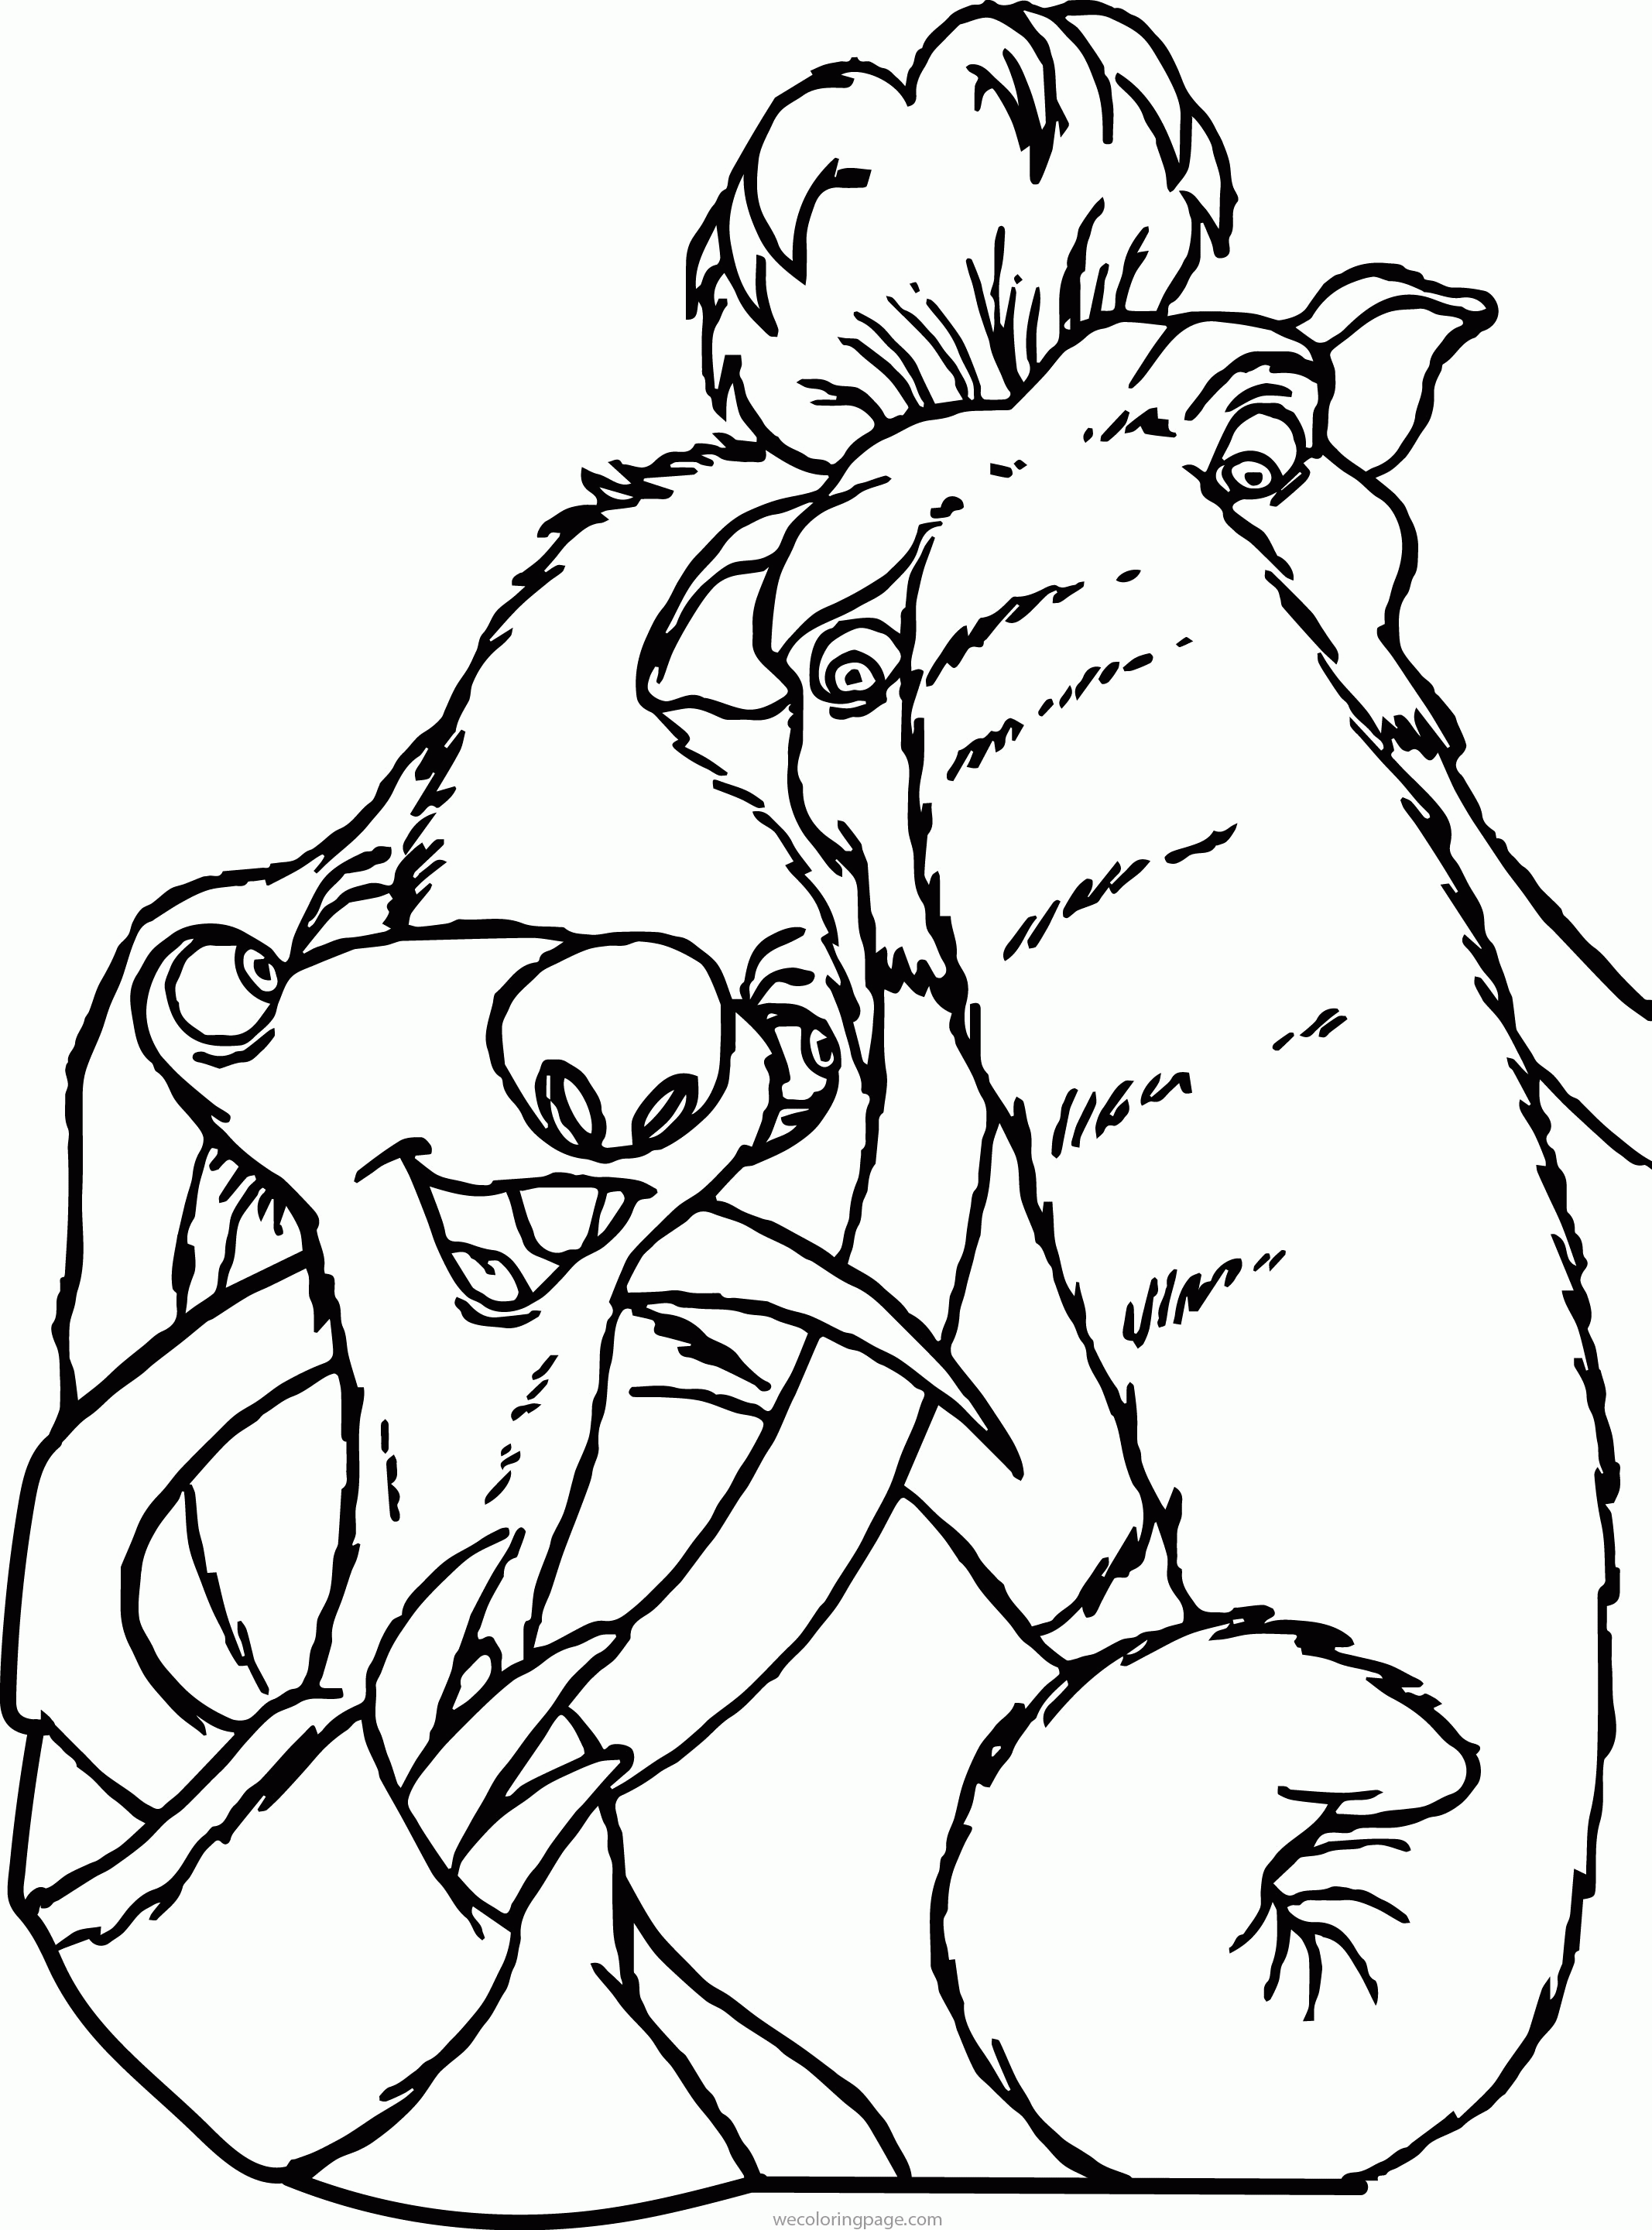 552 Simple Ice Age Coloring Pages Online for Kindergarten